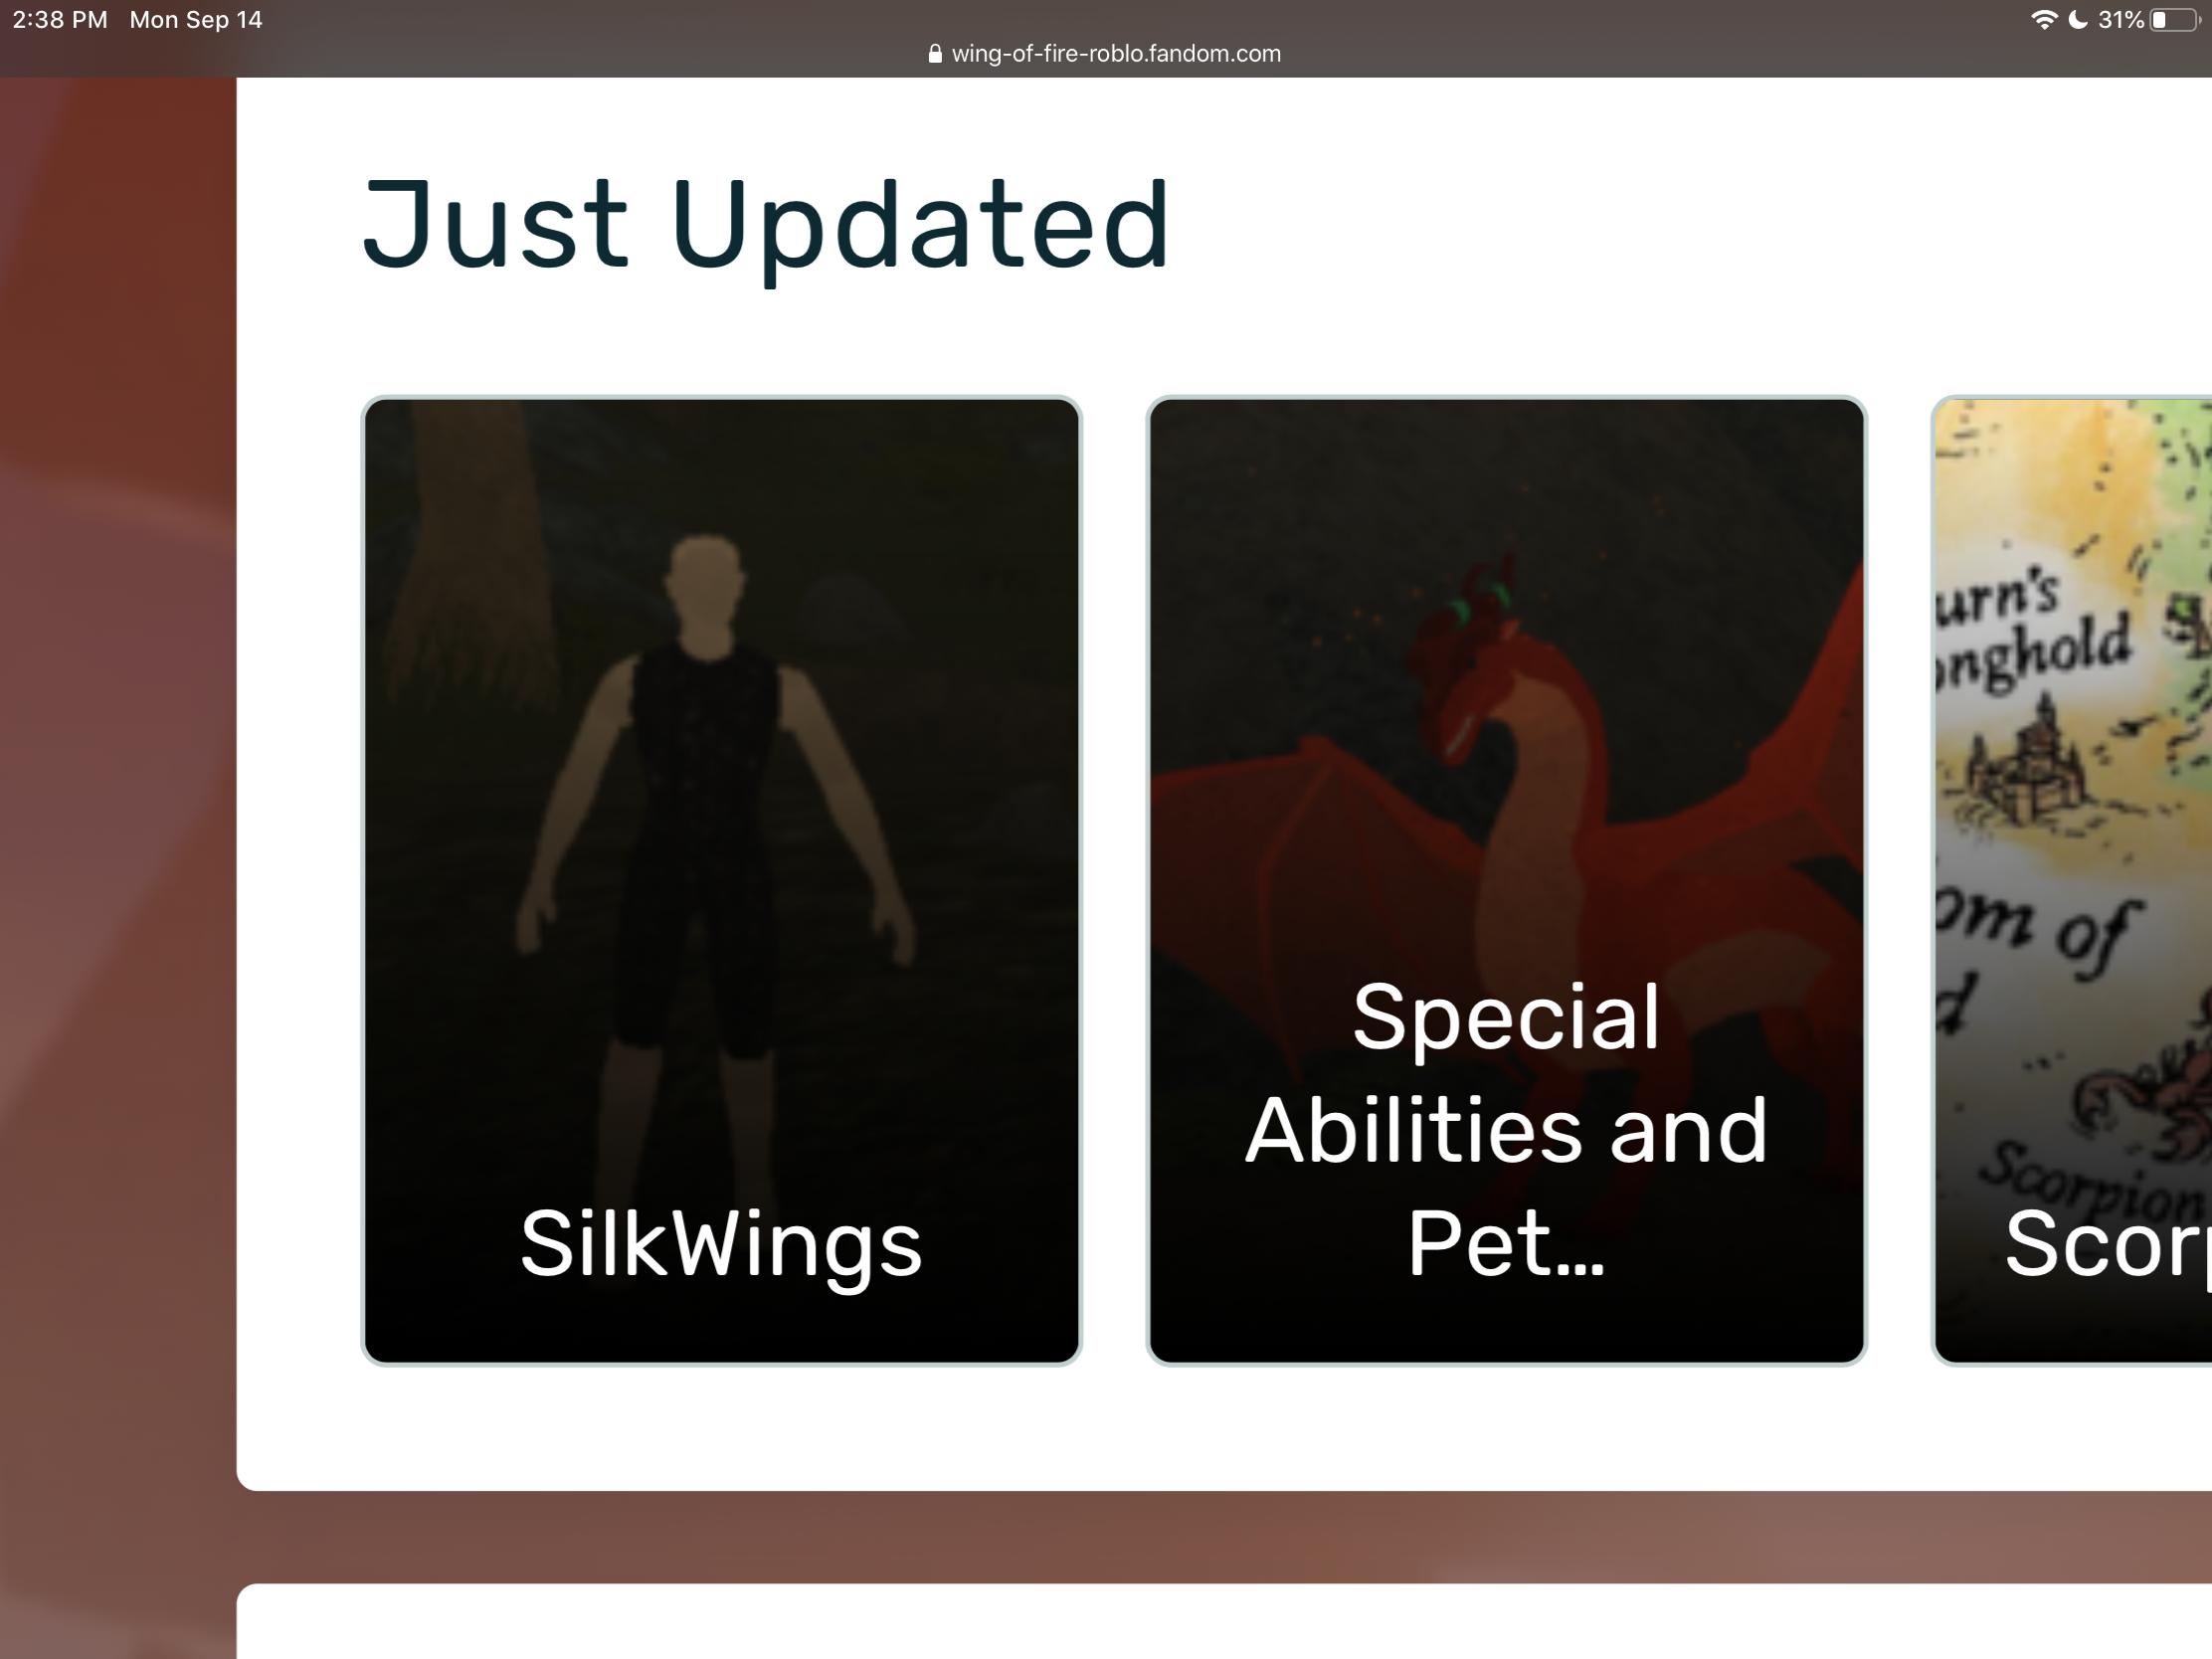 Ah Yes Silkwings The Most Beautiful And Majestic Tribe Fandom - most beautiful roblox pictures